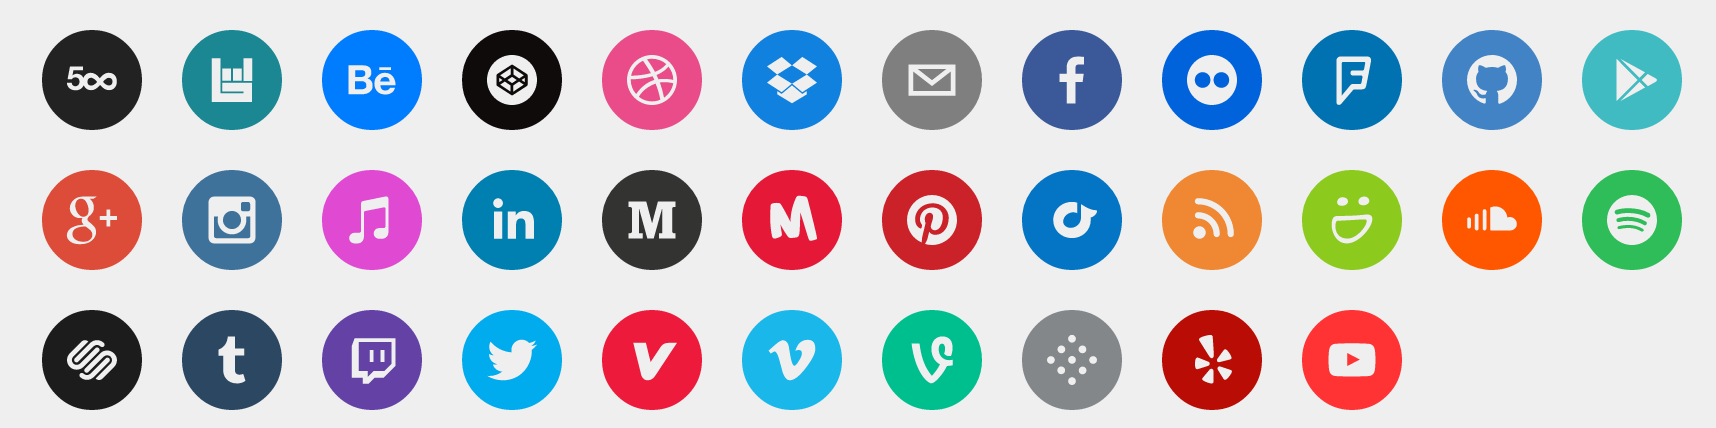 social network icons